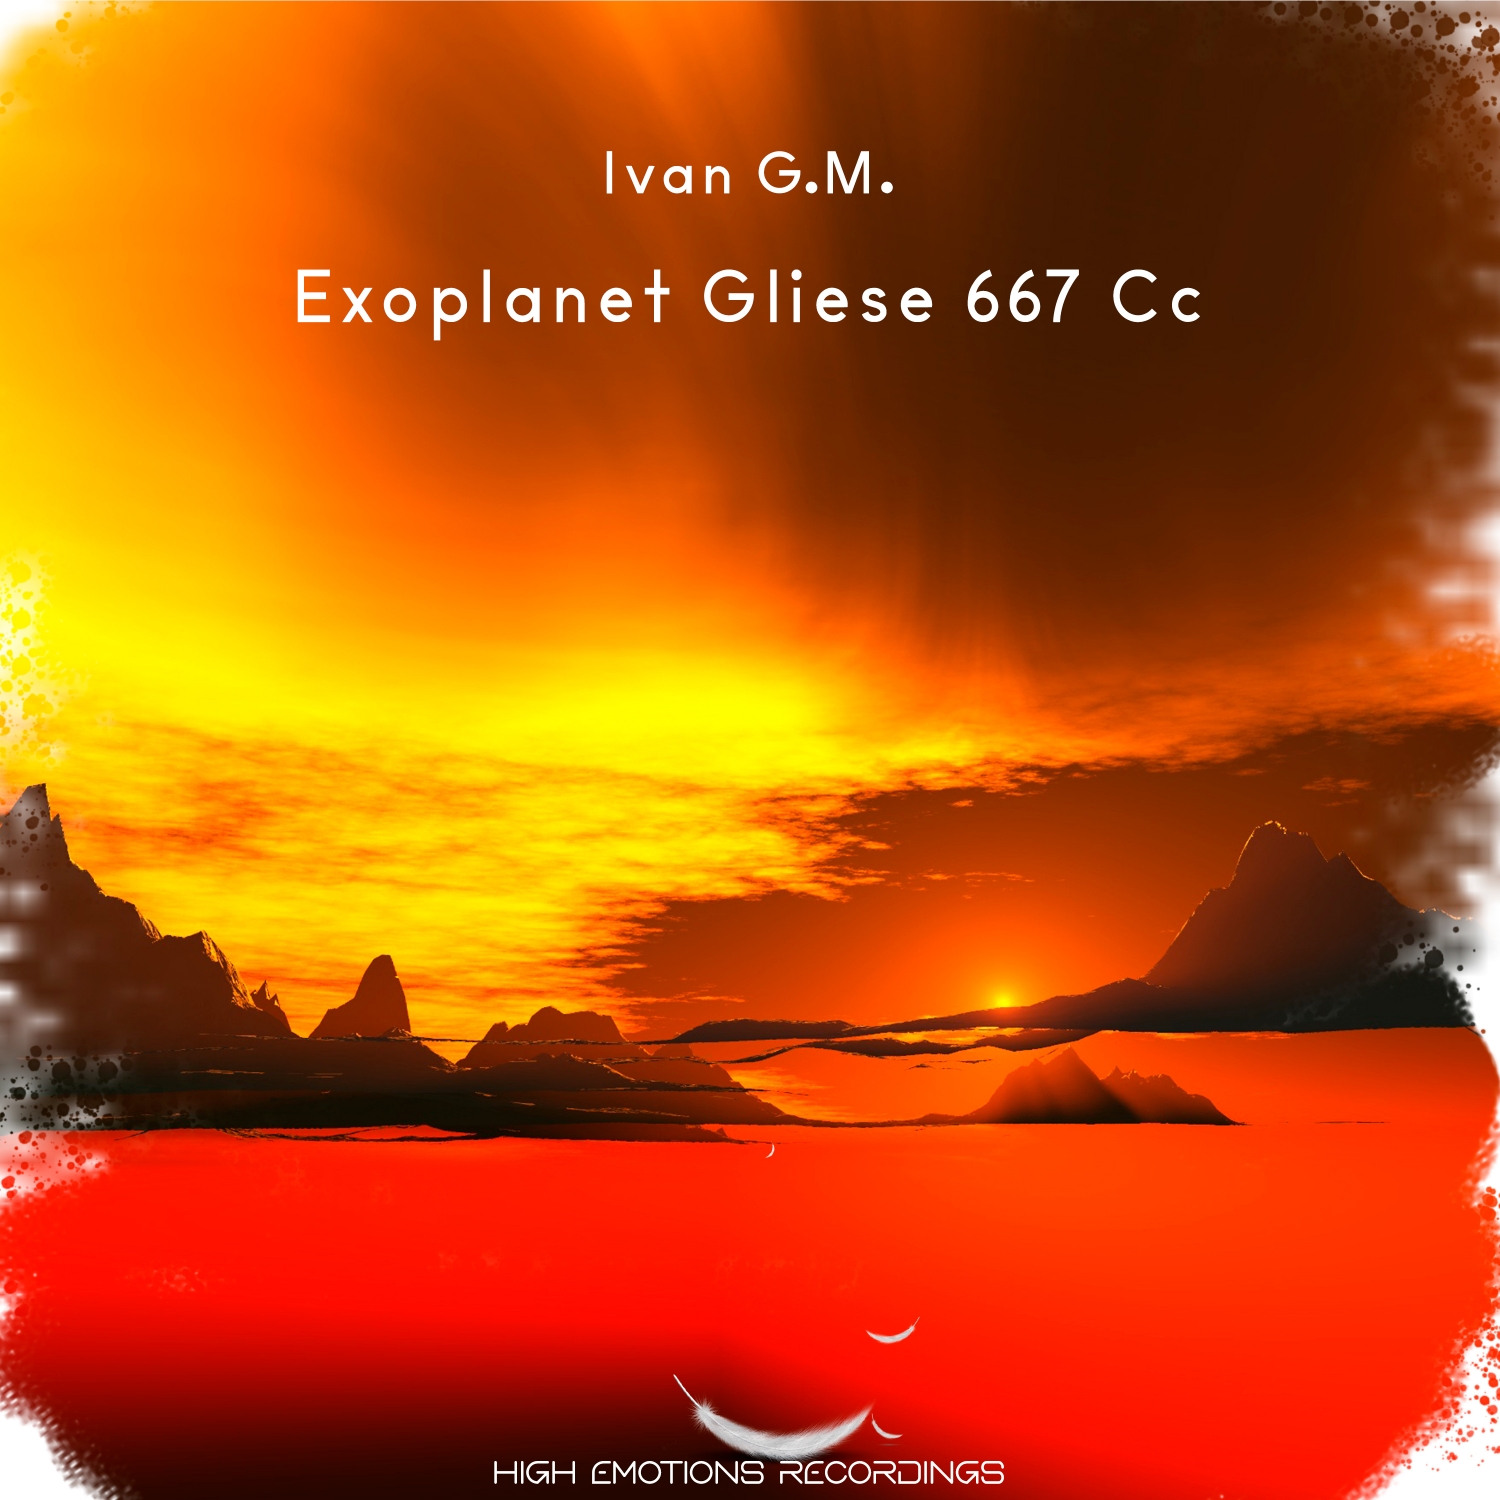 Ivan G.M. presents Exoplanet Gliese 667 Cc on High Emotions Recordings